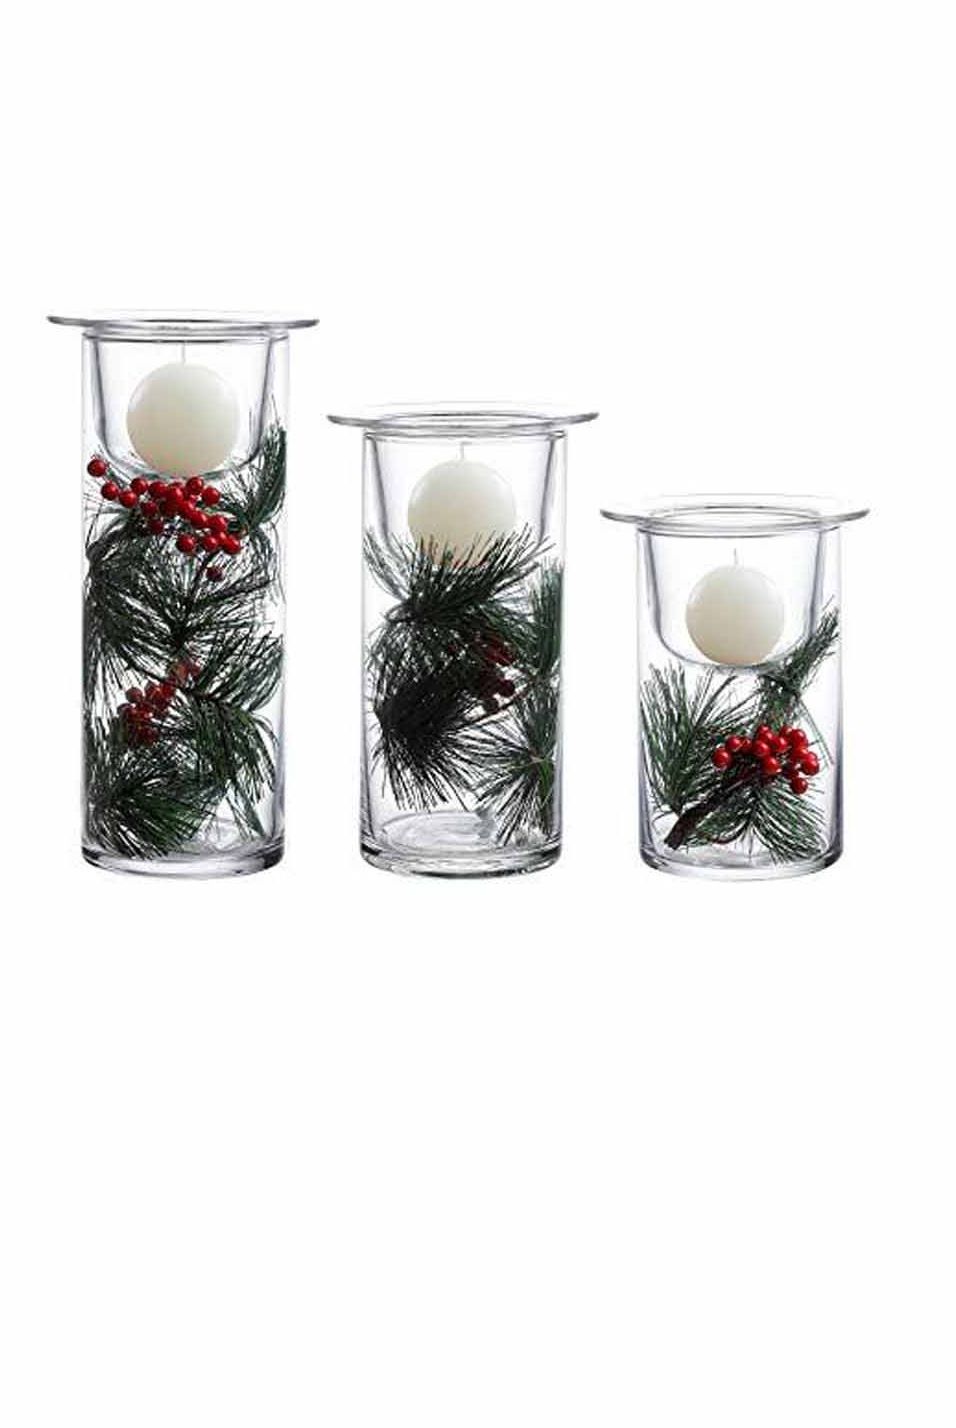 Glass Hurricane Candle Holders with Christmas Ornaments